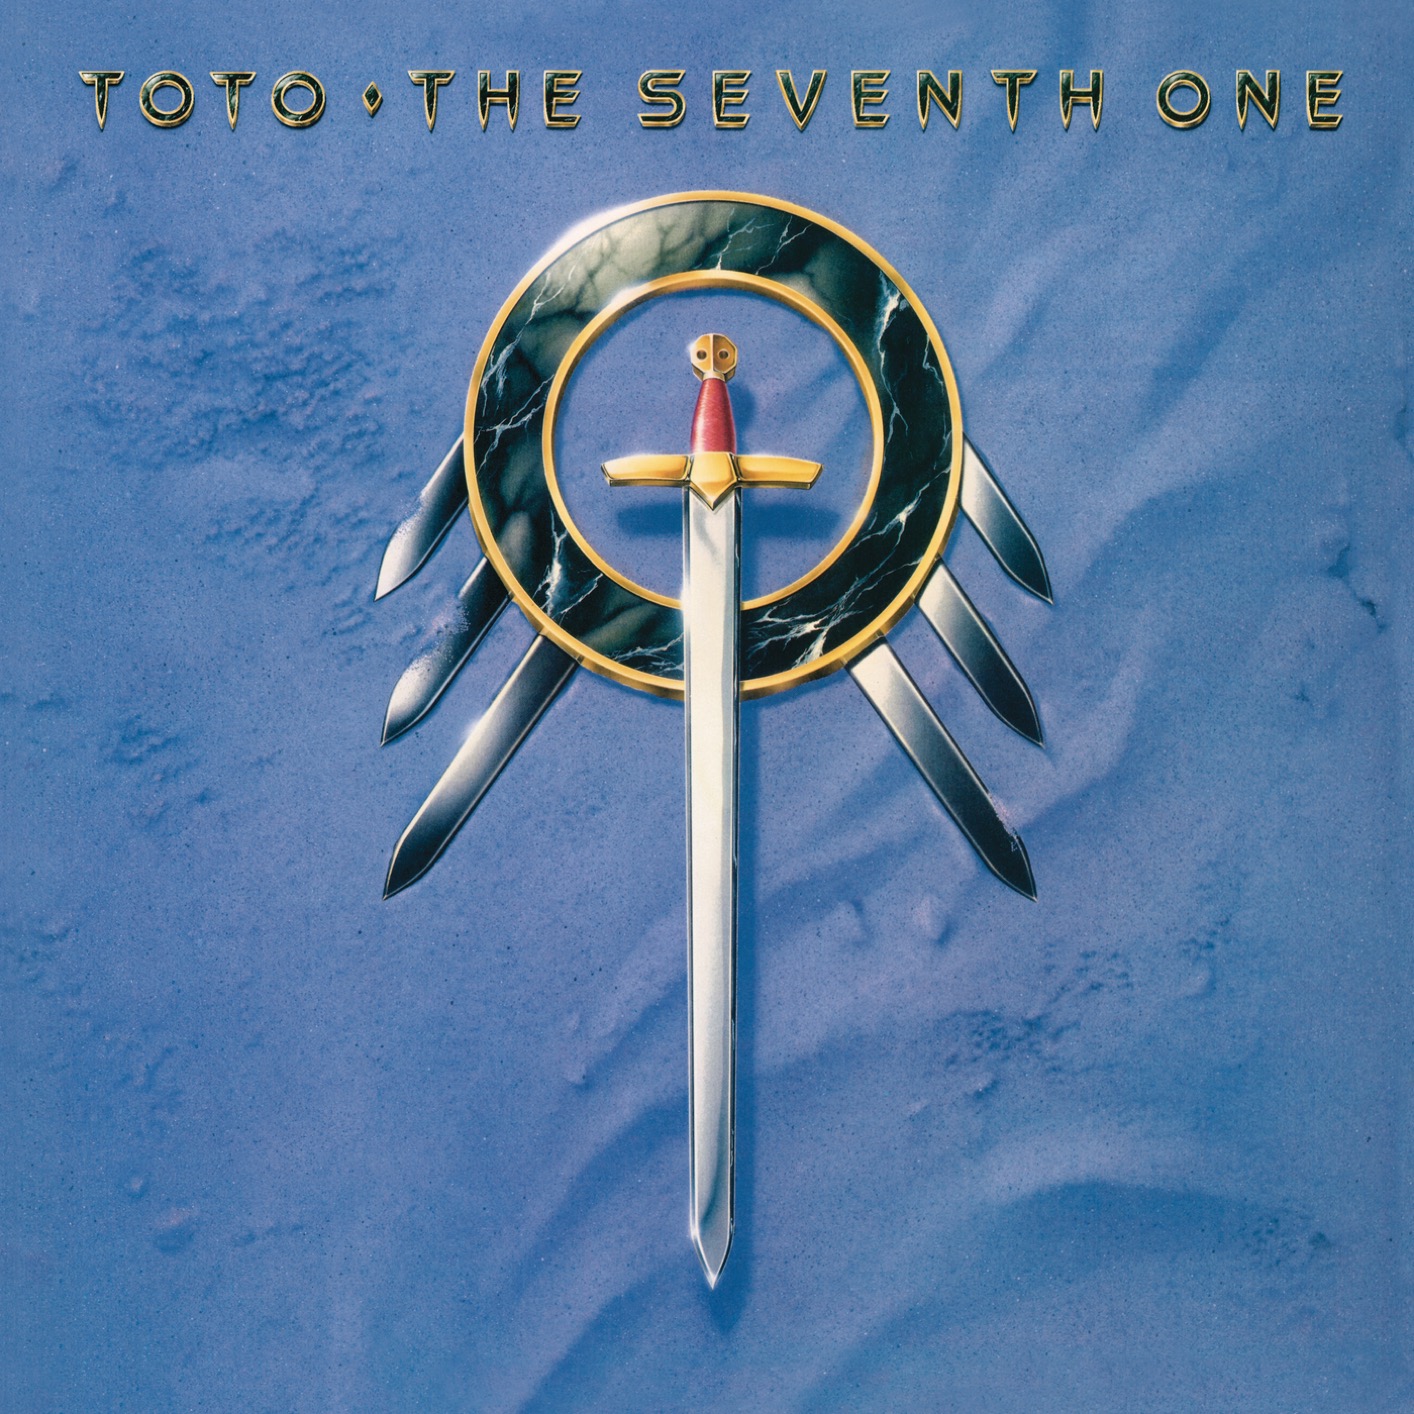 Toto – The Seventh One (Remastered) (1988/2020) [FLAC 24bit/192kHz]